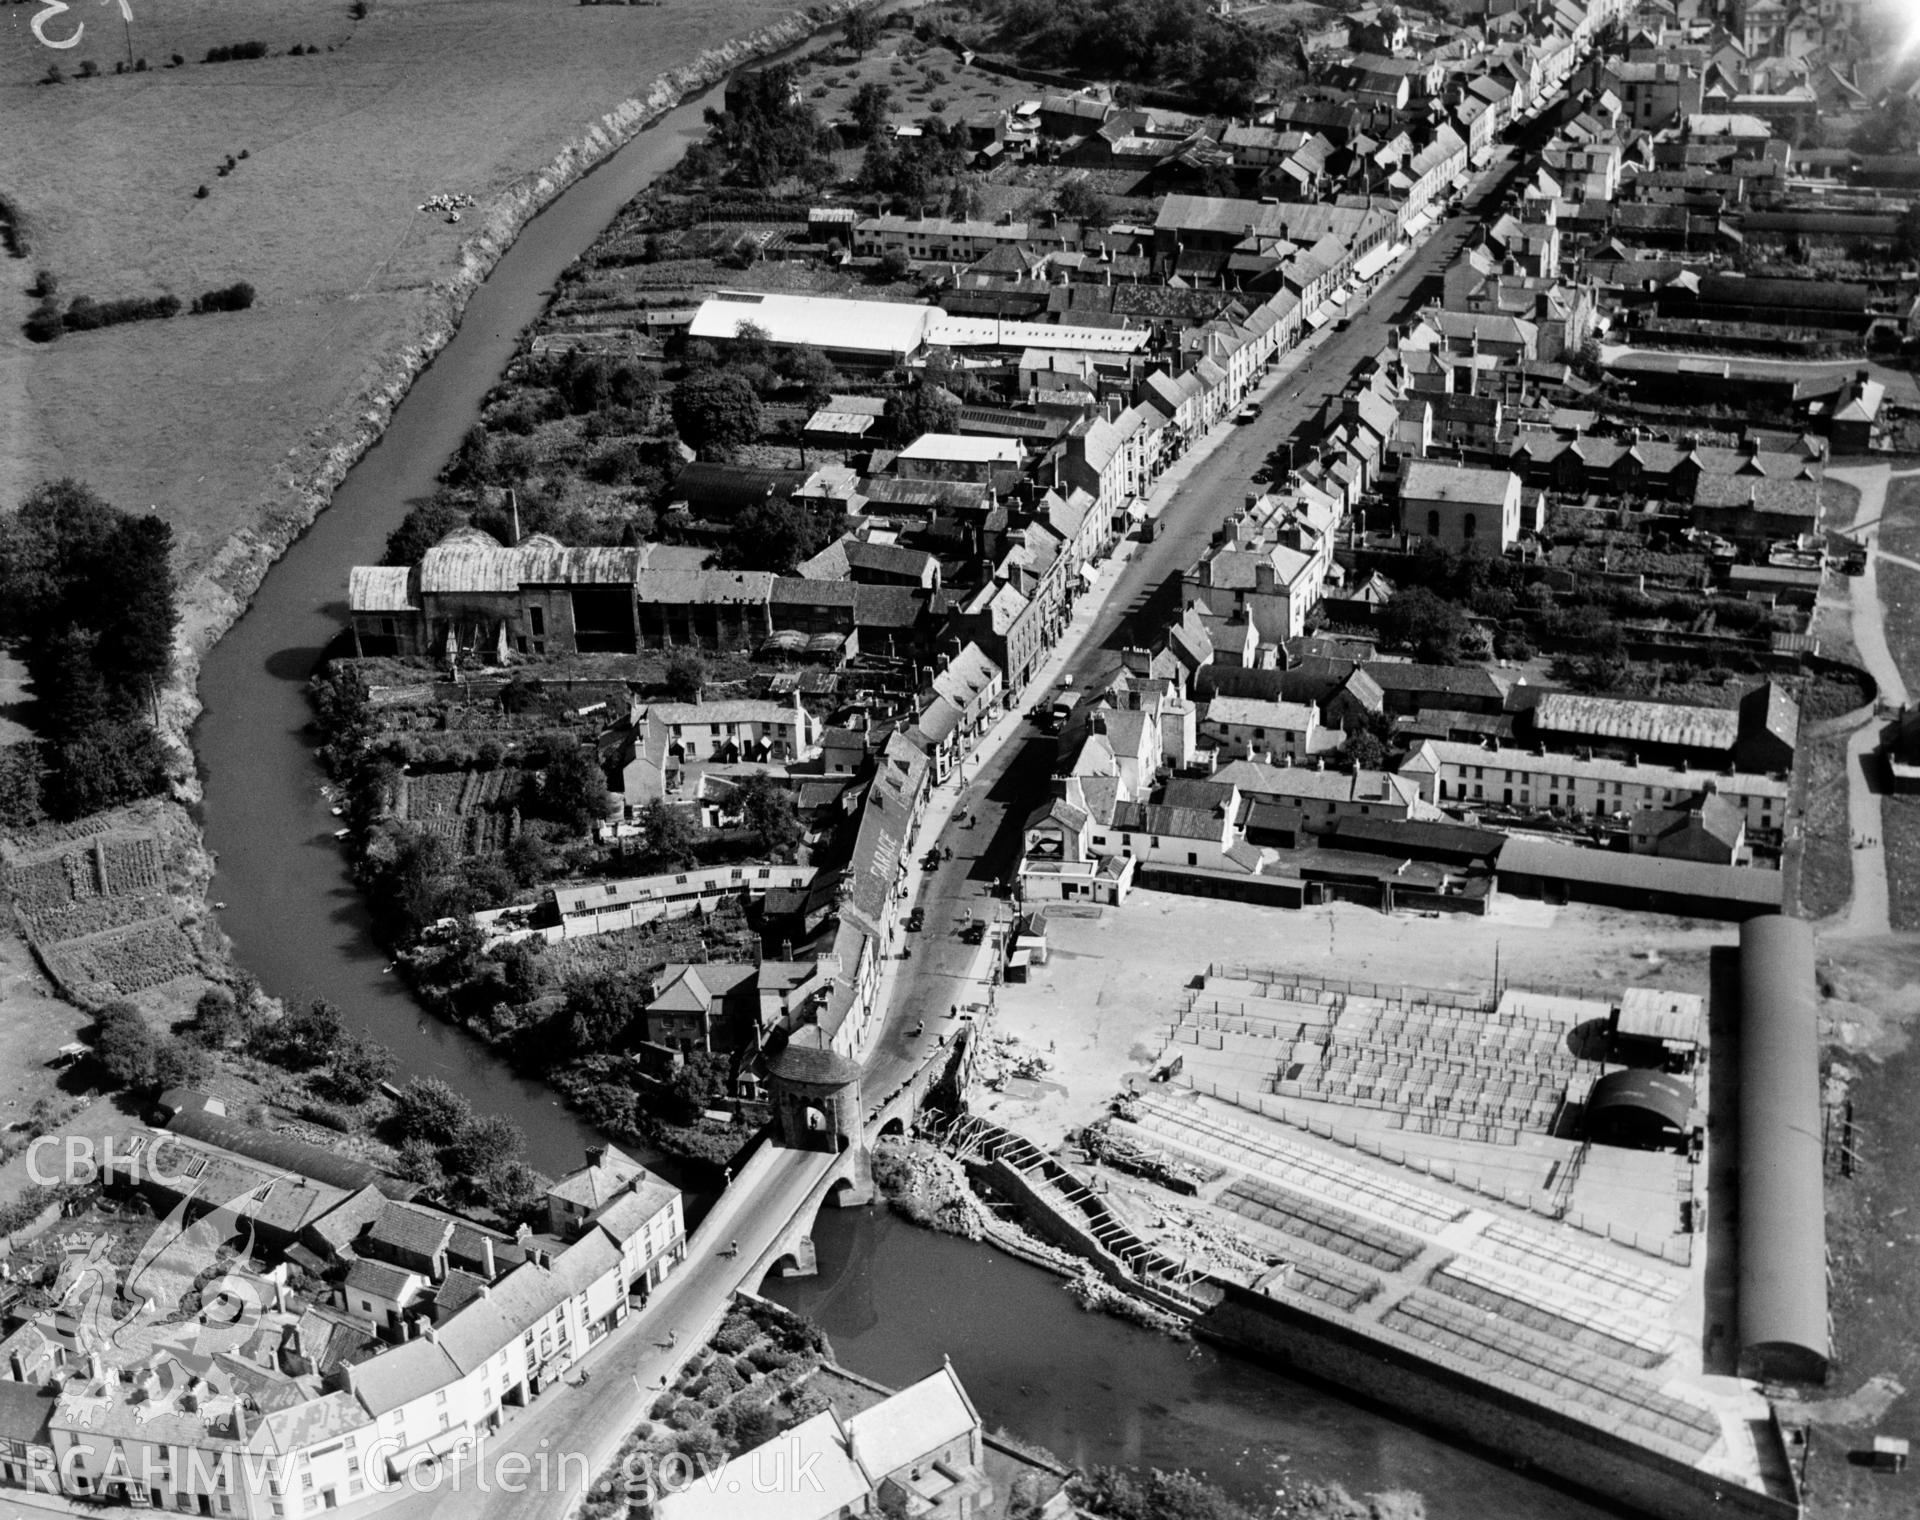 View of Monmouth showing Monnow bridge and cattle market. Oblique aerial photograph, 5?x4? BW glass plate.